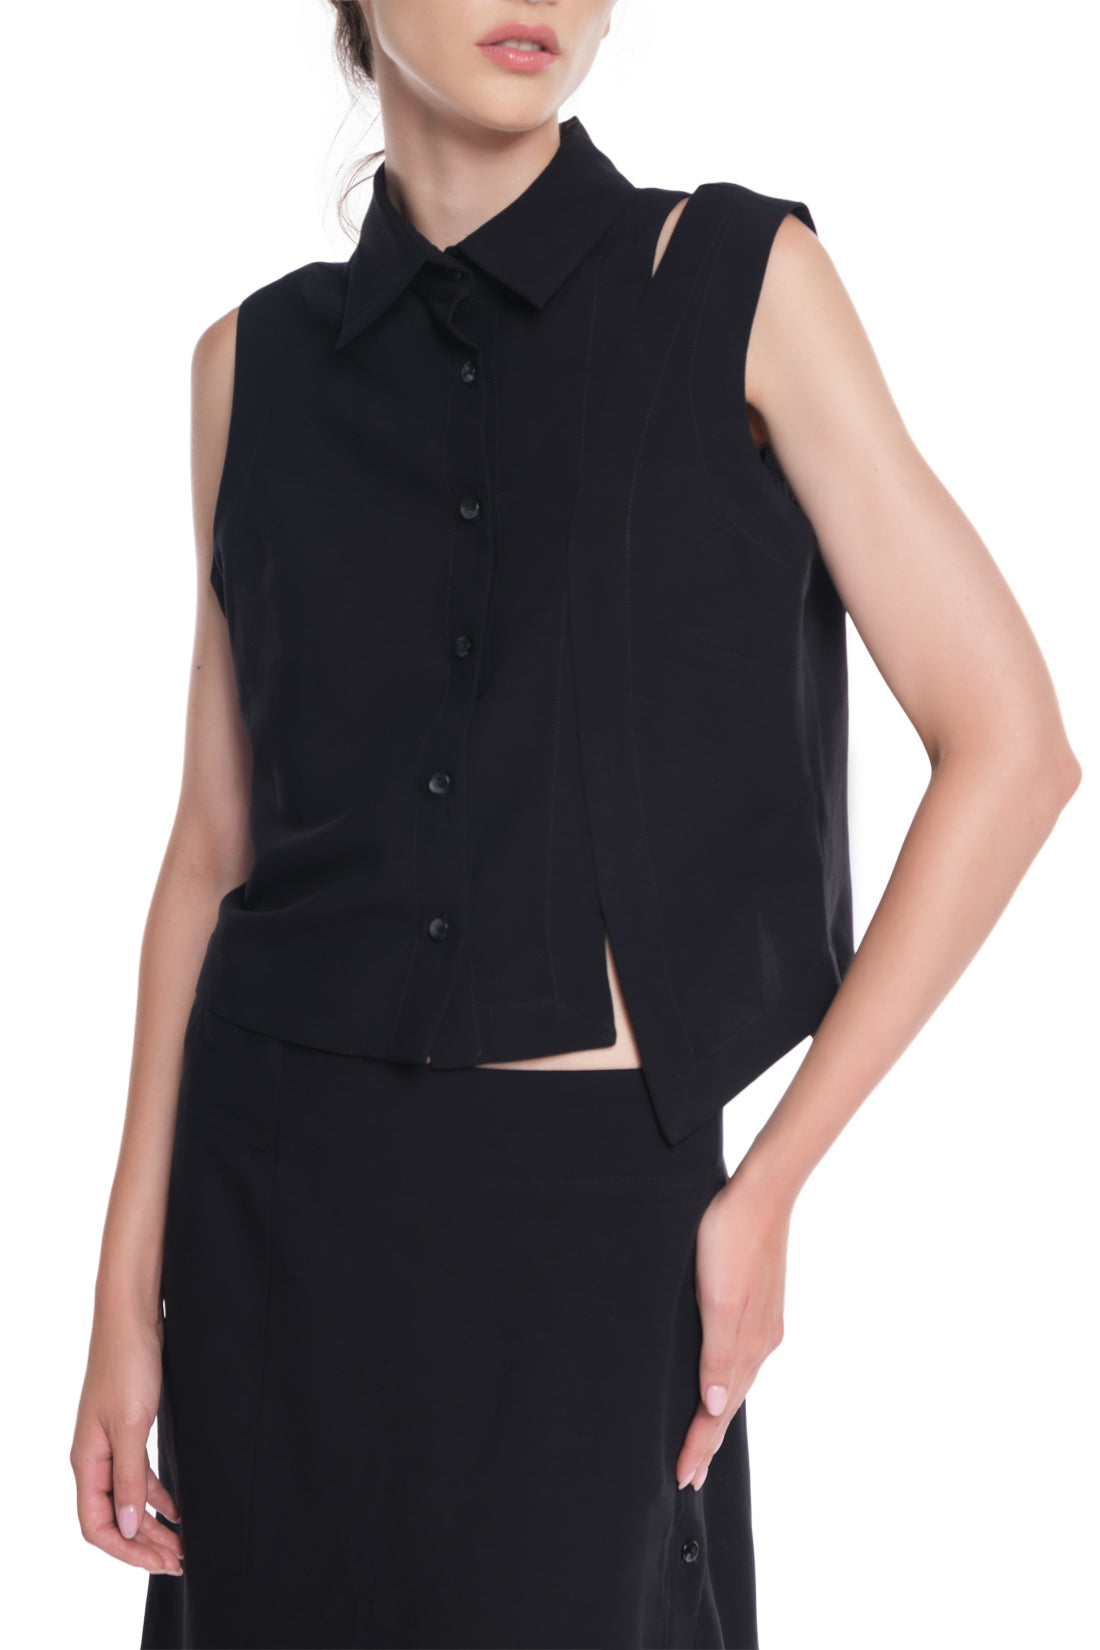 BUTTONED TOP WITH COLLAR, FRONT CUTTING ON THE SHOULDER, ASYMMETRICAL DESIGN